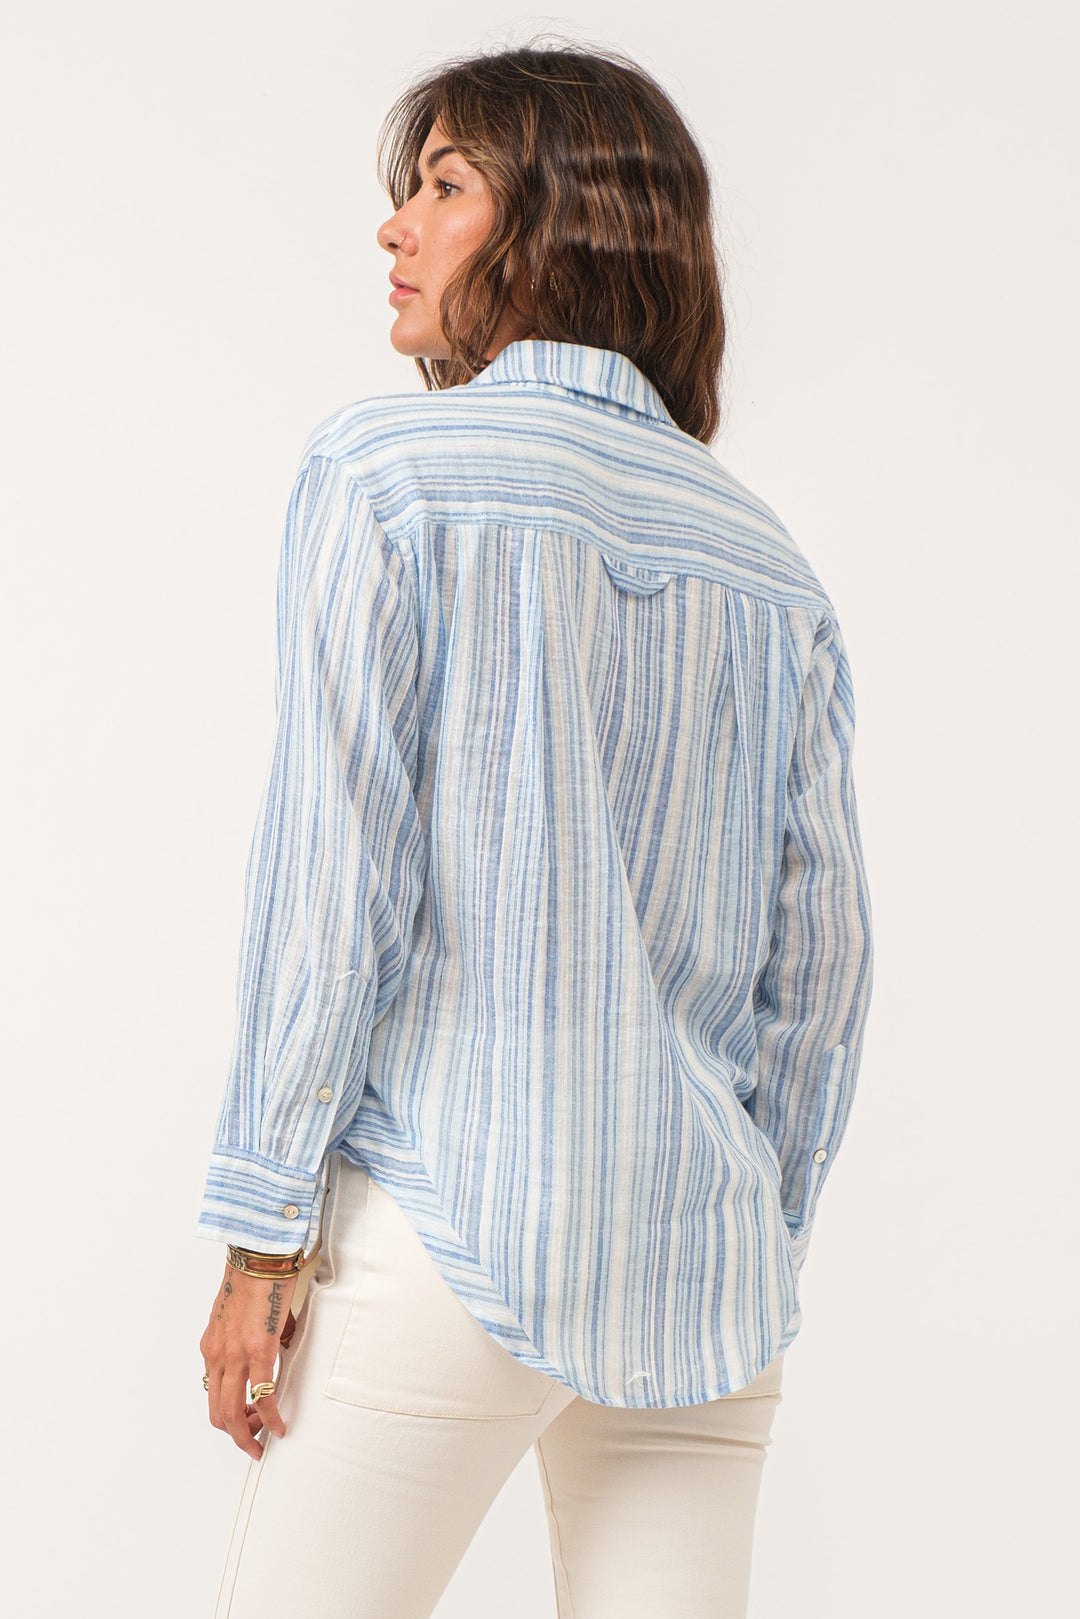 LOLA BUTTON DOWN COLLARED SHIRT-BLUE STREAK - Kingfisher Road - Online Boutique